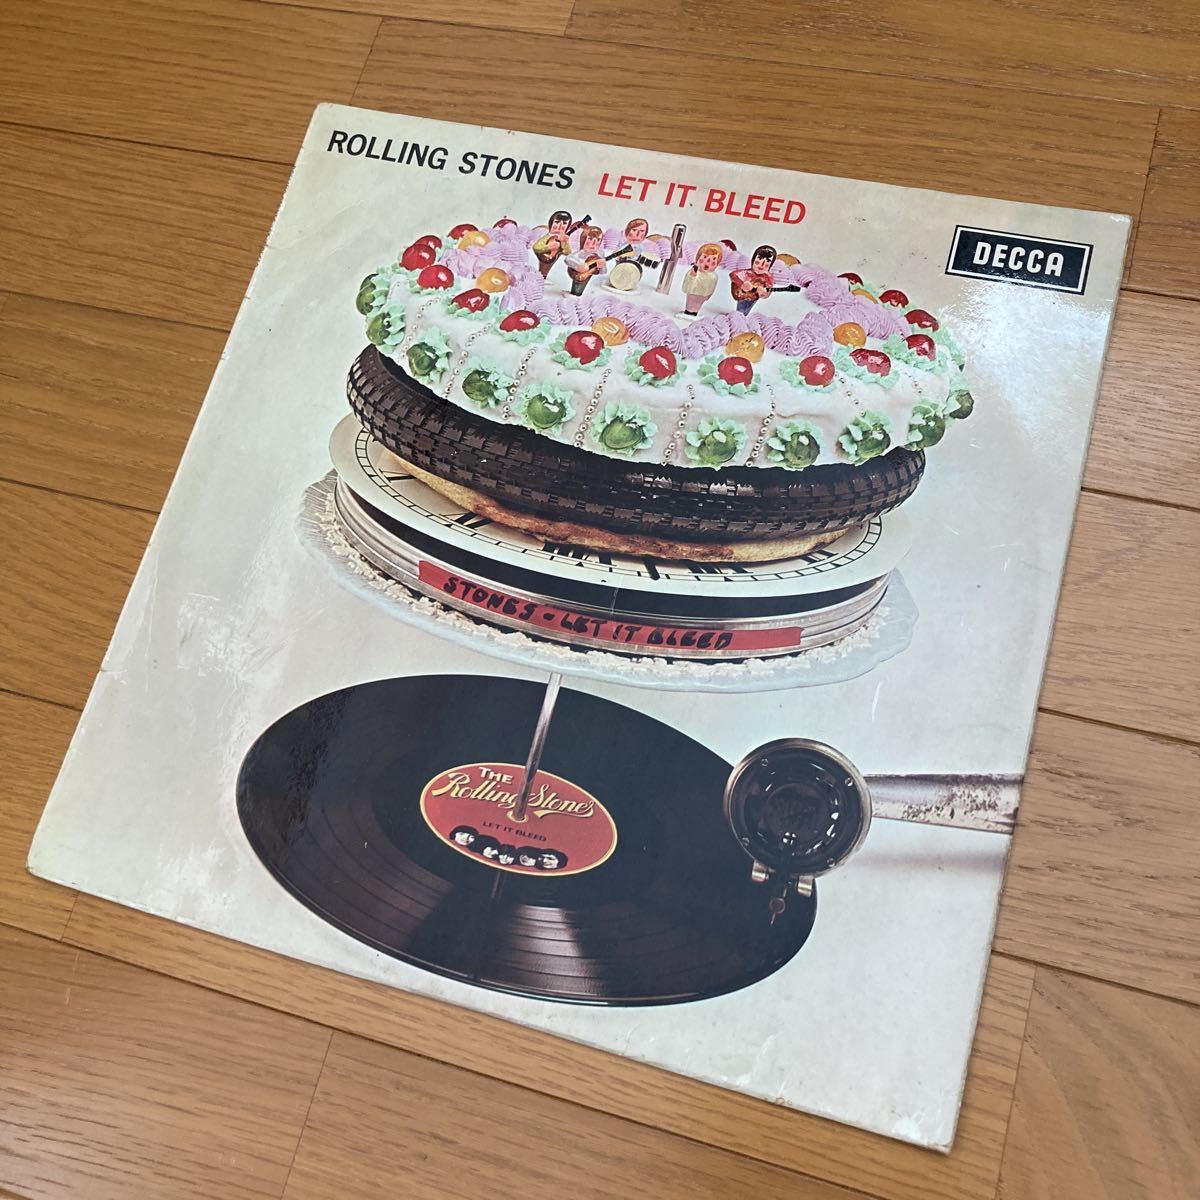 ROLLING STONES LET IT BLEED 英国オリジナルモノラル盤 1A/1A レットイットブリード ローリング・ストーンズ 的详细信息  | 雅虎拍卖代拍 | FROM JAPAN